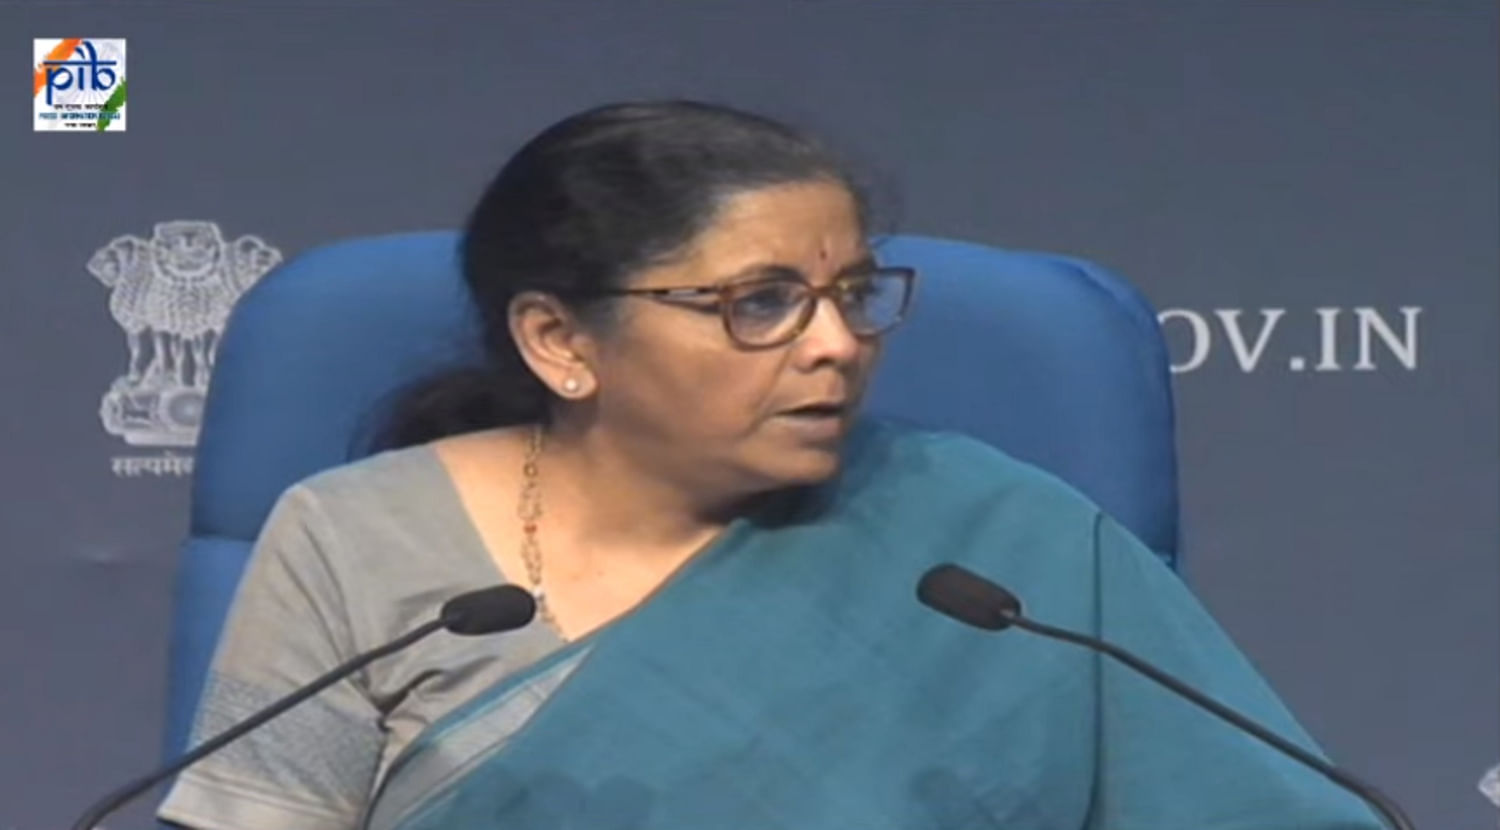 “We must foresee the issues faced by our business community and proactively address the same to enable them to compete on a global scale. Only by this proactivity can we ensure much needed economic growth in near future,” Finance Minister Nirmala Sitharaman said in the message on the occasion of GST Day, 2020. Credit: Youtube Screengrab